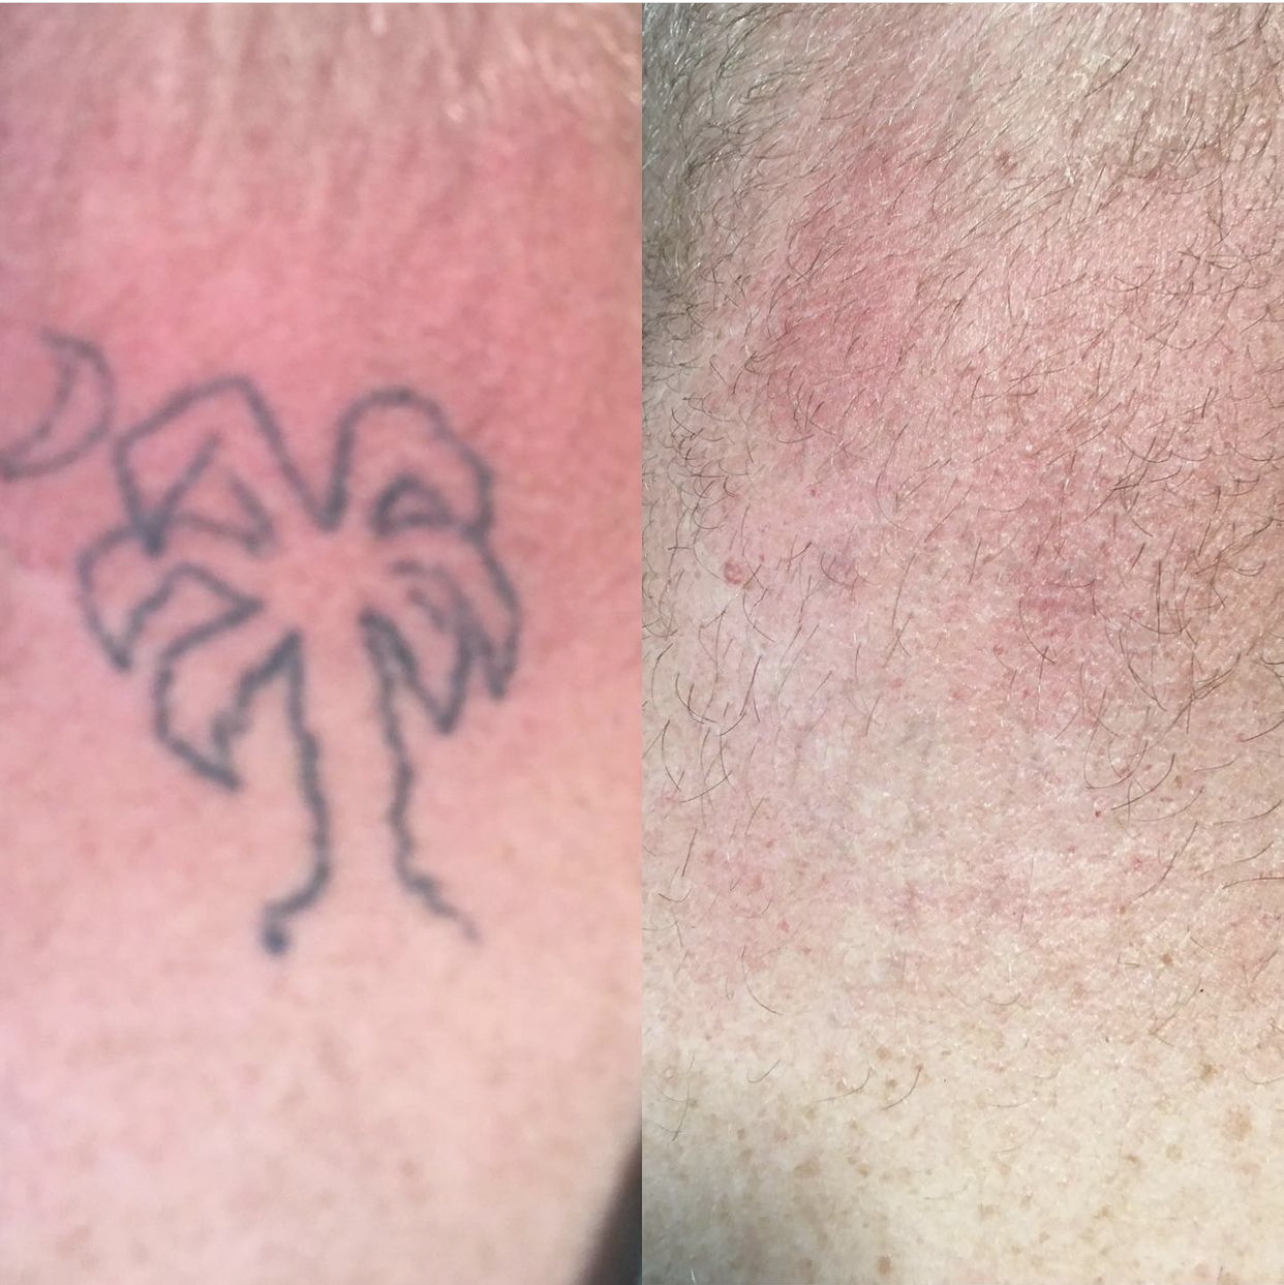 Tattoo Removal Specialist Near Me in Shaker Heights, OH